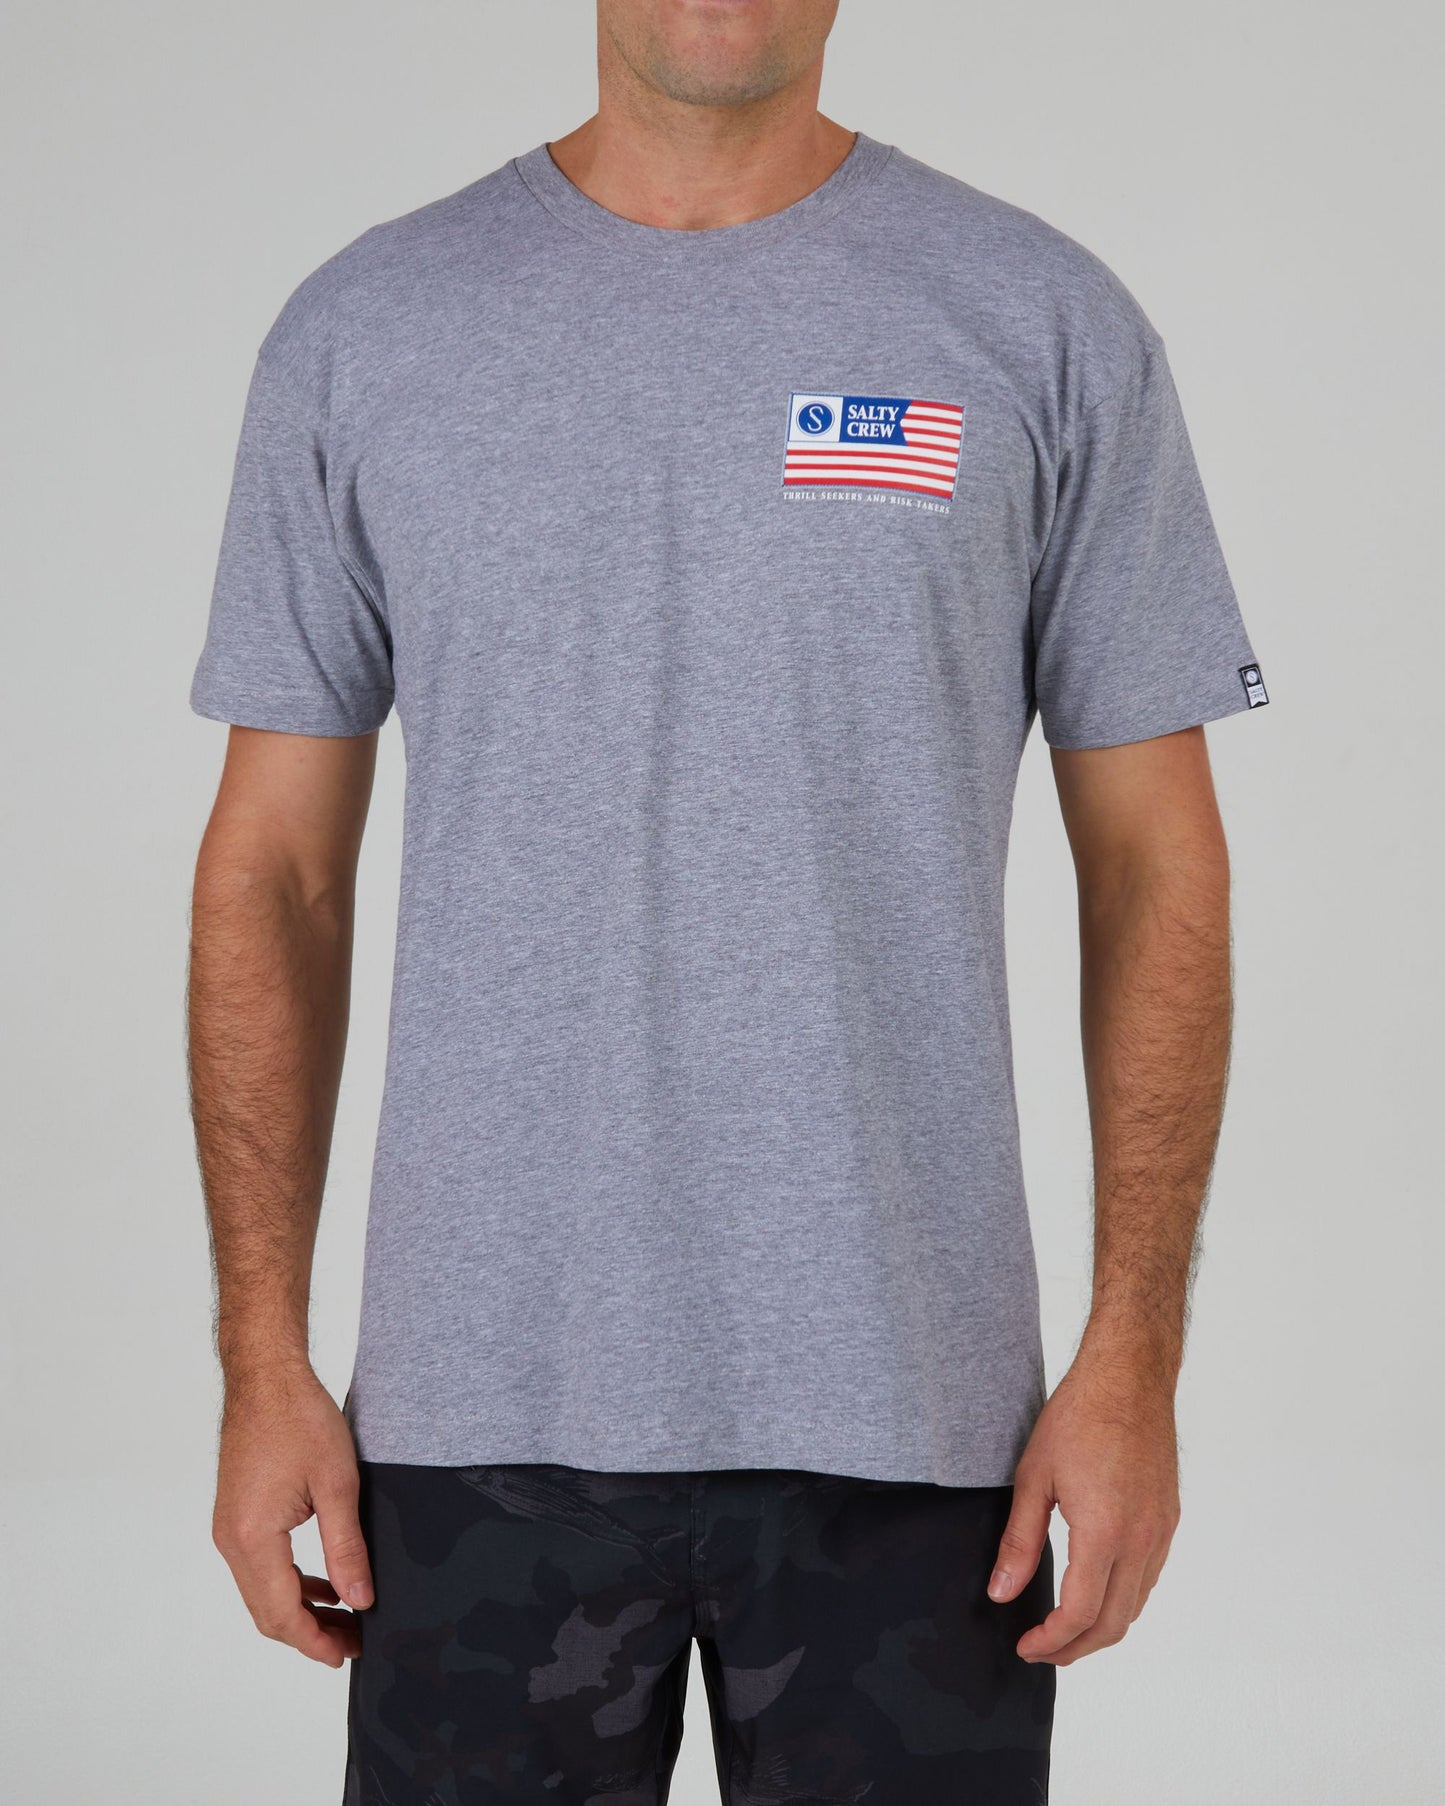 On body front of the Freedom Flag Athletic Heather S/S Premium Tee